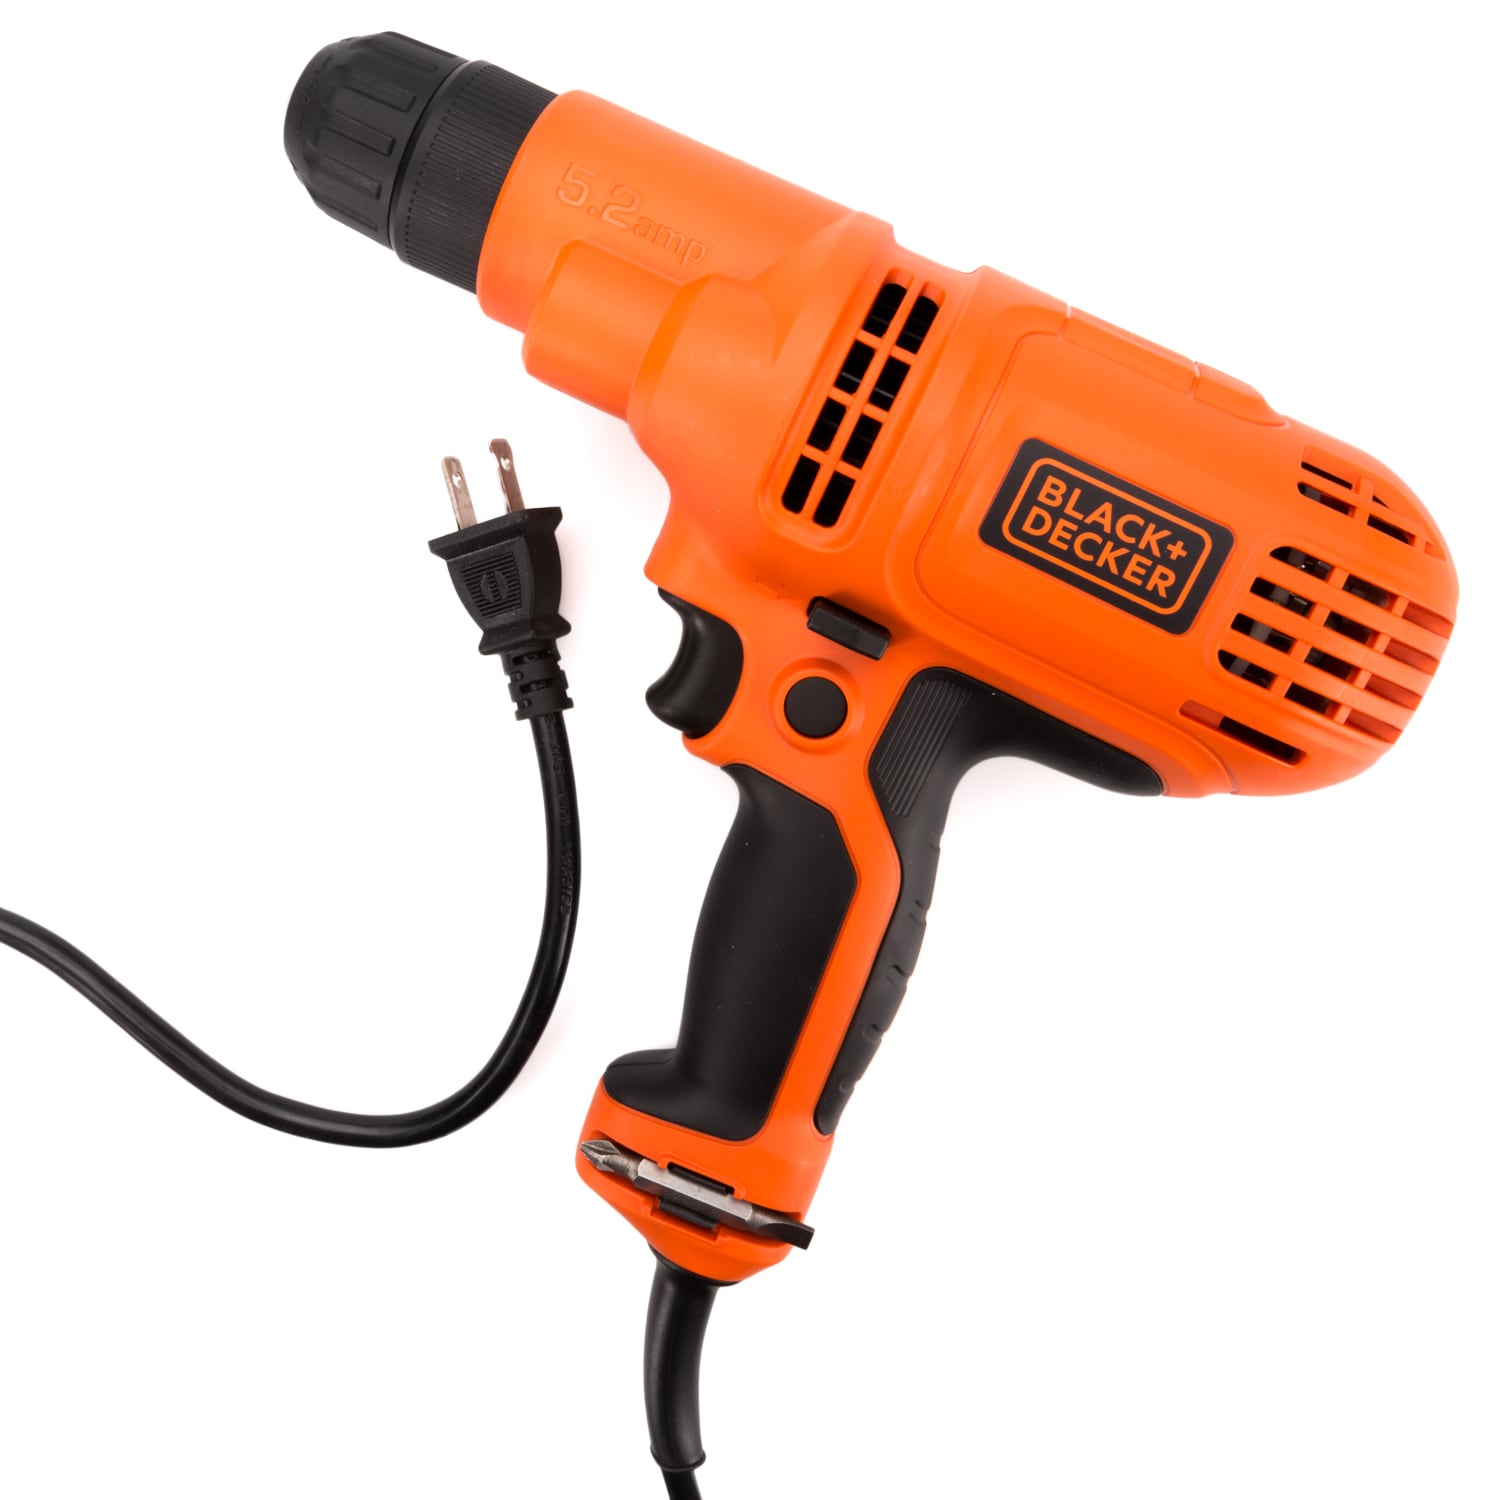 BLACK+DECKER Corded Drill, 5.2-Amp - tools - by owner - sale